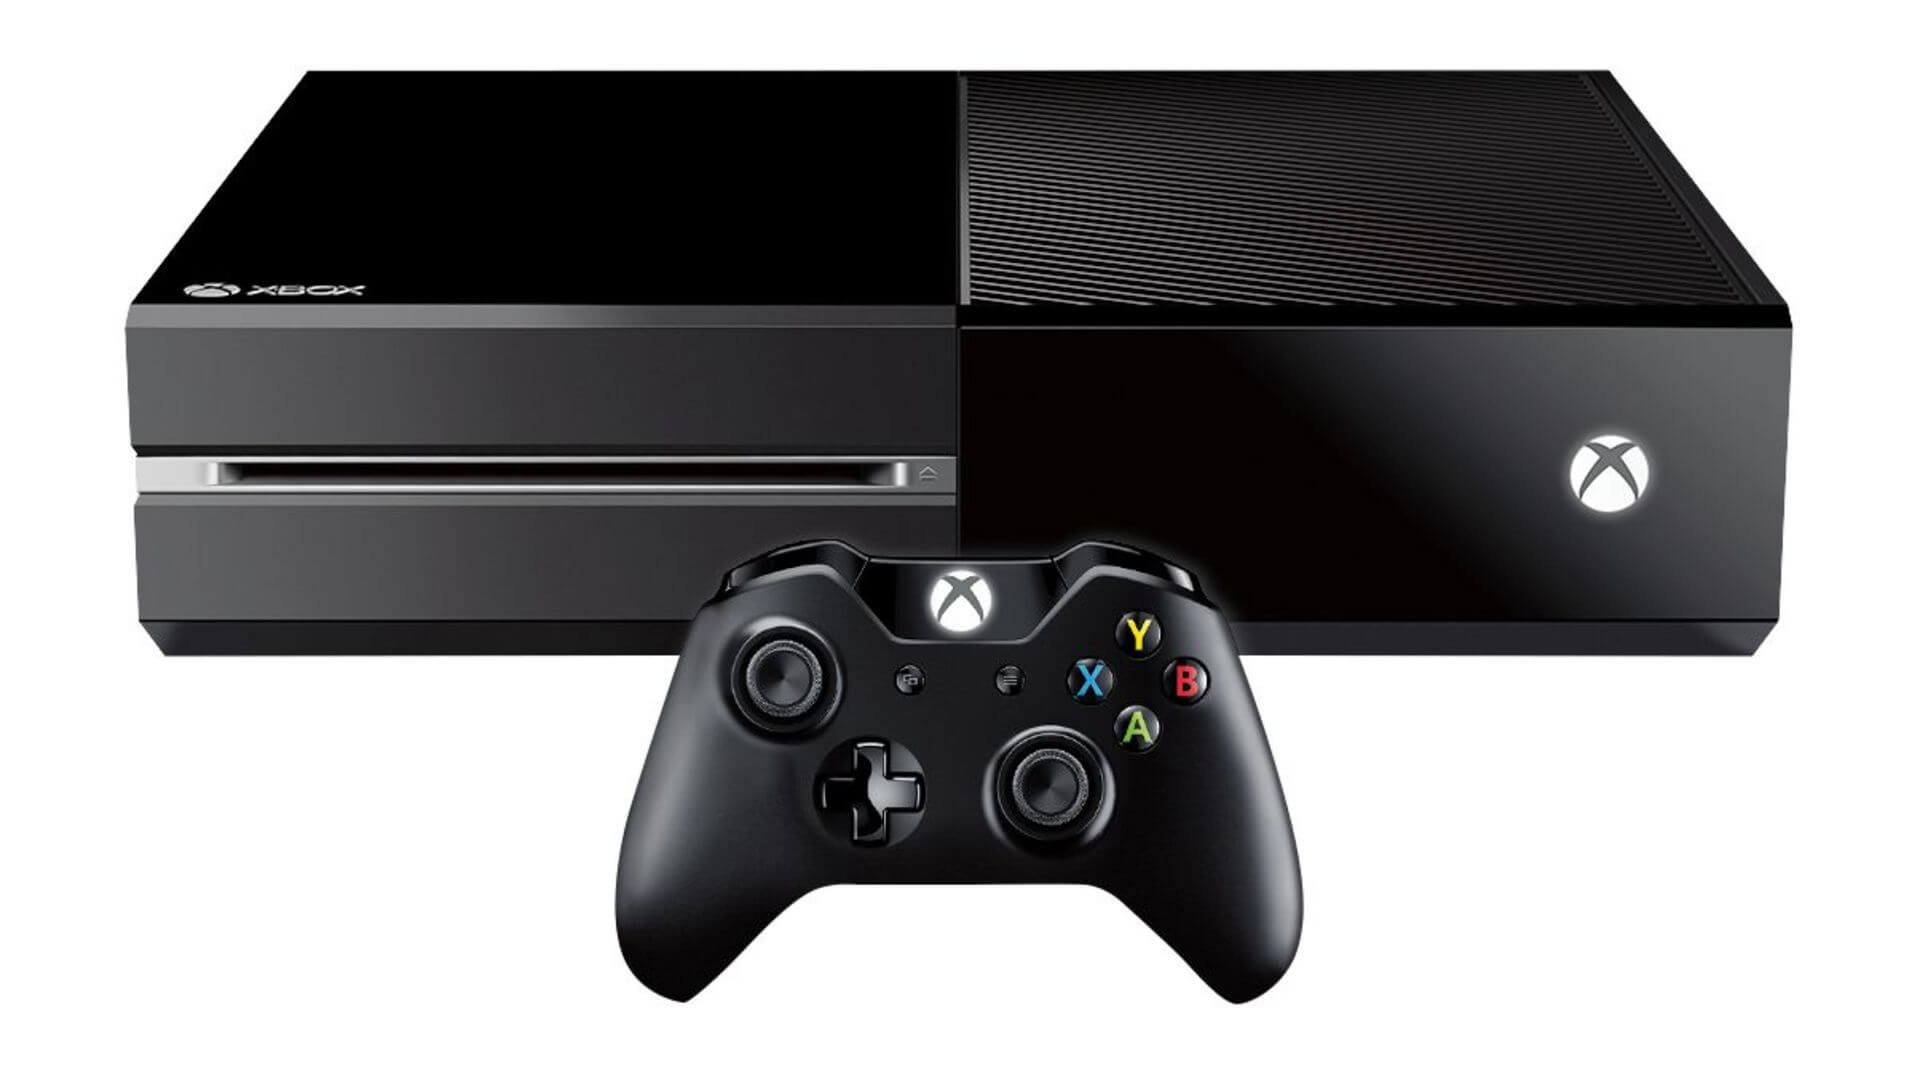 The Xbox One, one of Microsoft's main pieces of hardware.